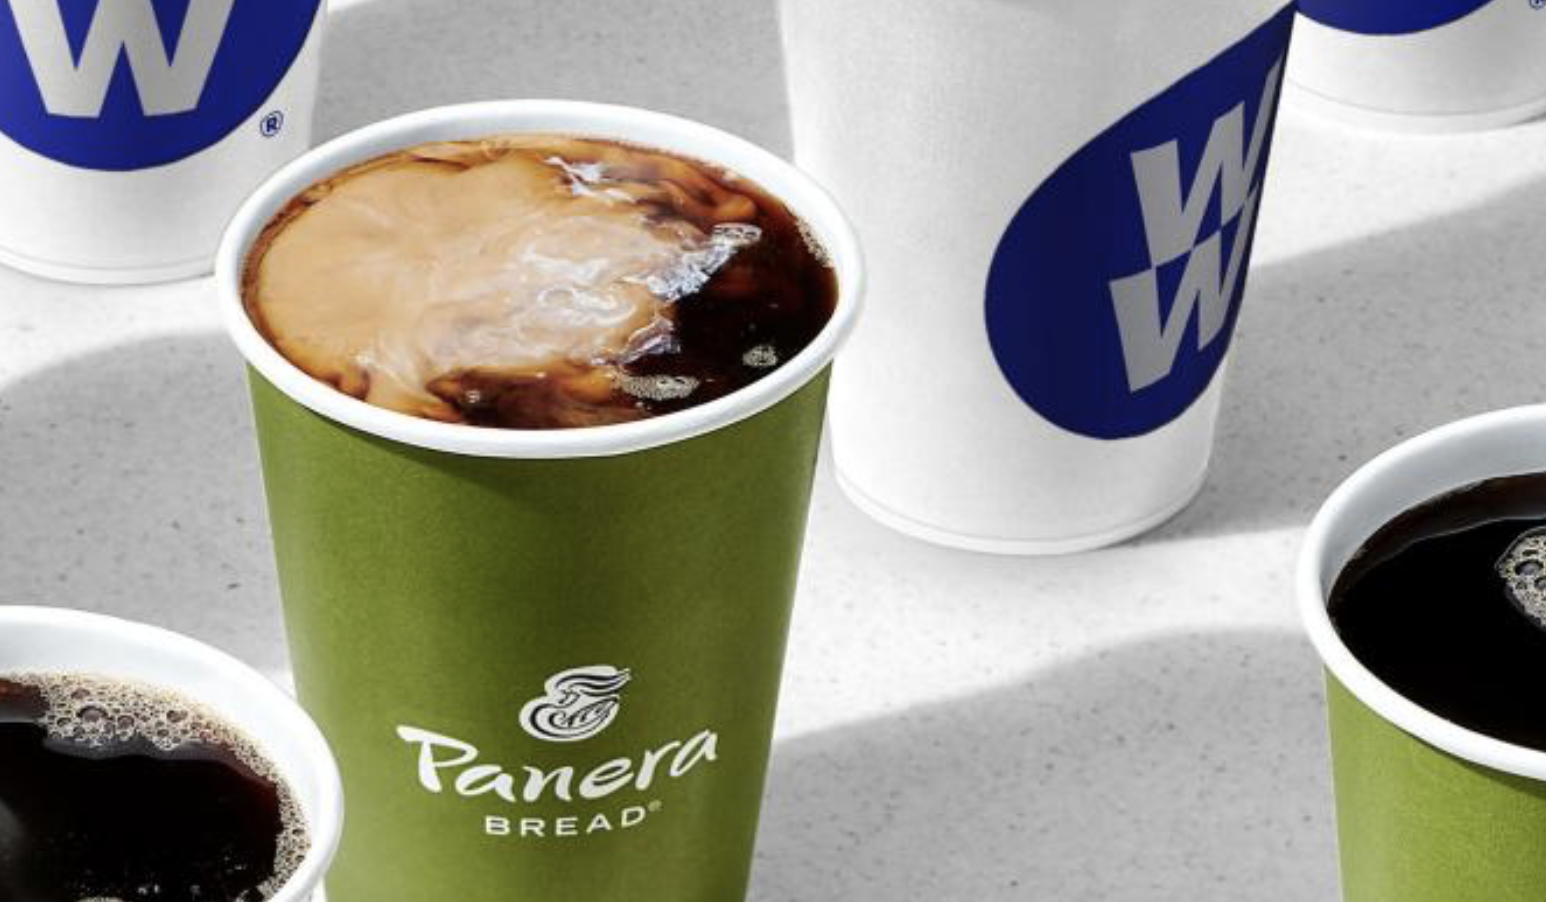 FREE Coffee Every Day this Month at Panera